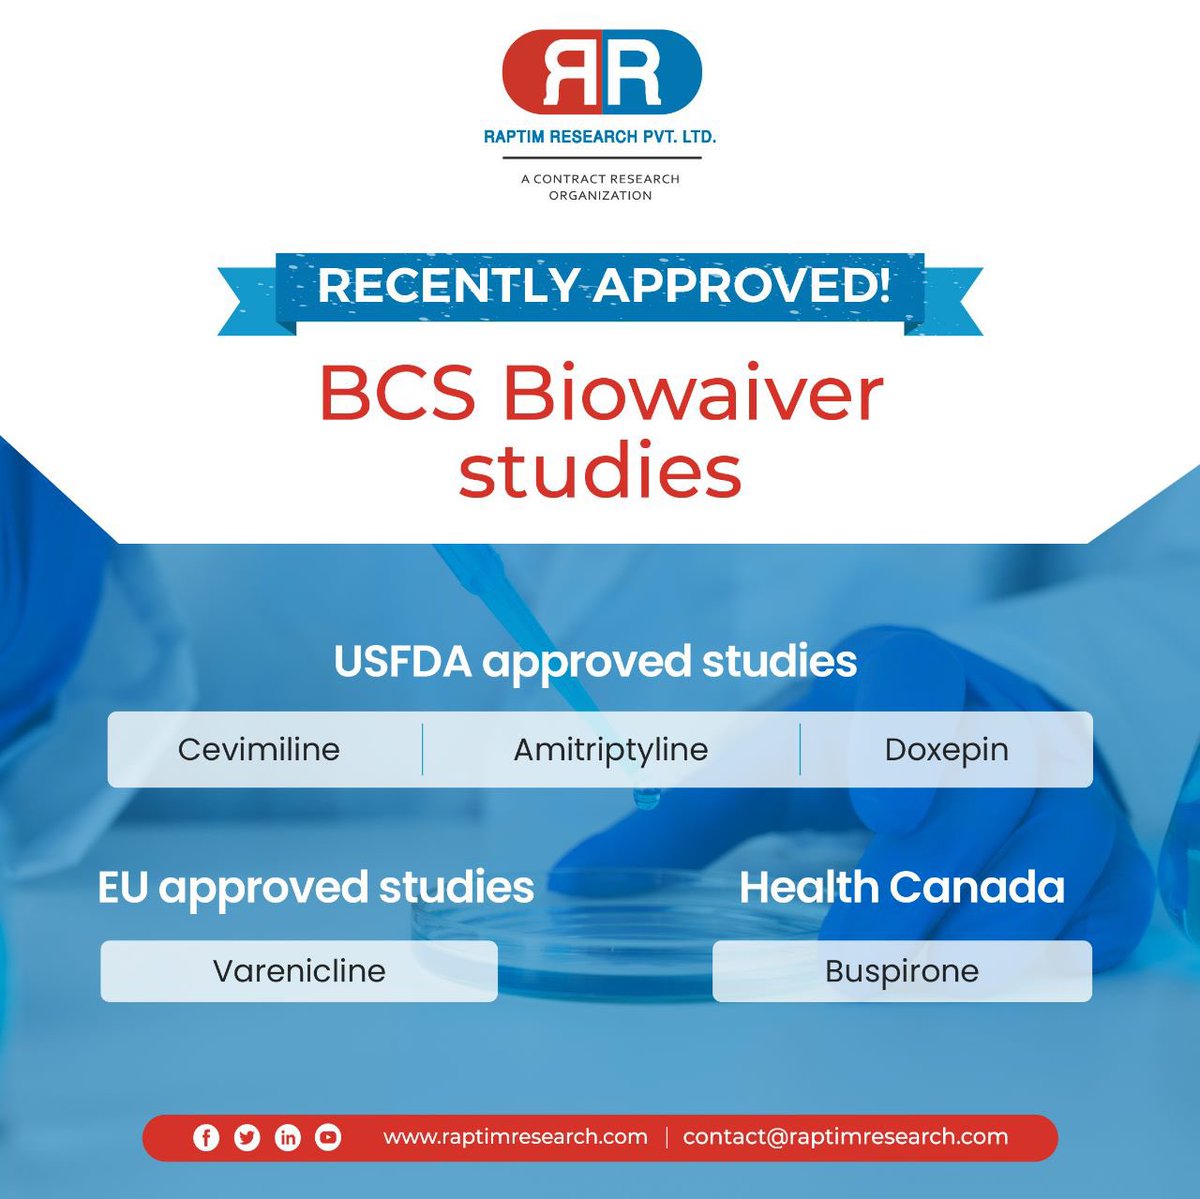 We are excited to share the news that Raptim Research has successfully secured approval for BCS Biowaiver studies!

This is a major milestone in our efforts to advance the pharmaceutical industry.

#RaptimResearch #ClinicalTrials #ClinicalStudies #USFDAApproved #PharmaIndustry